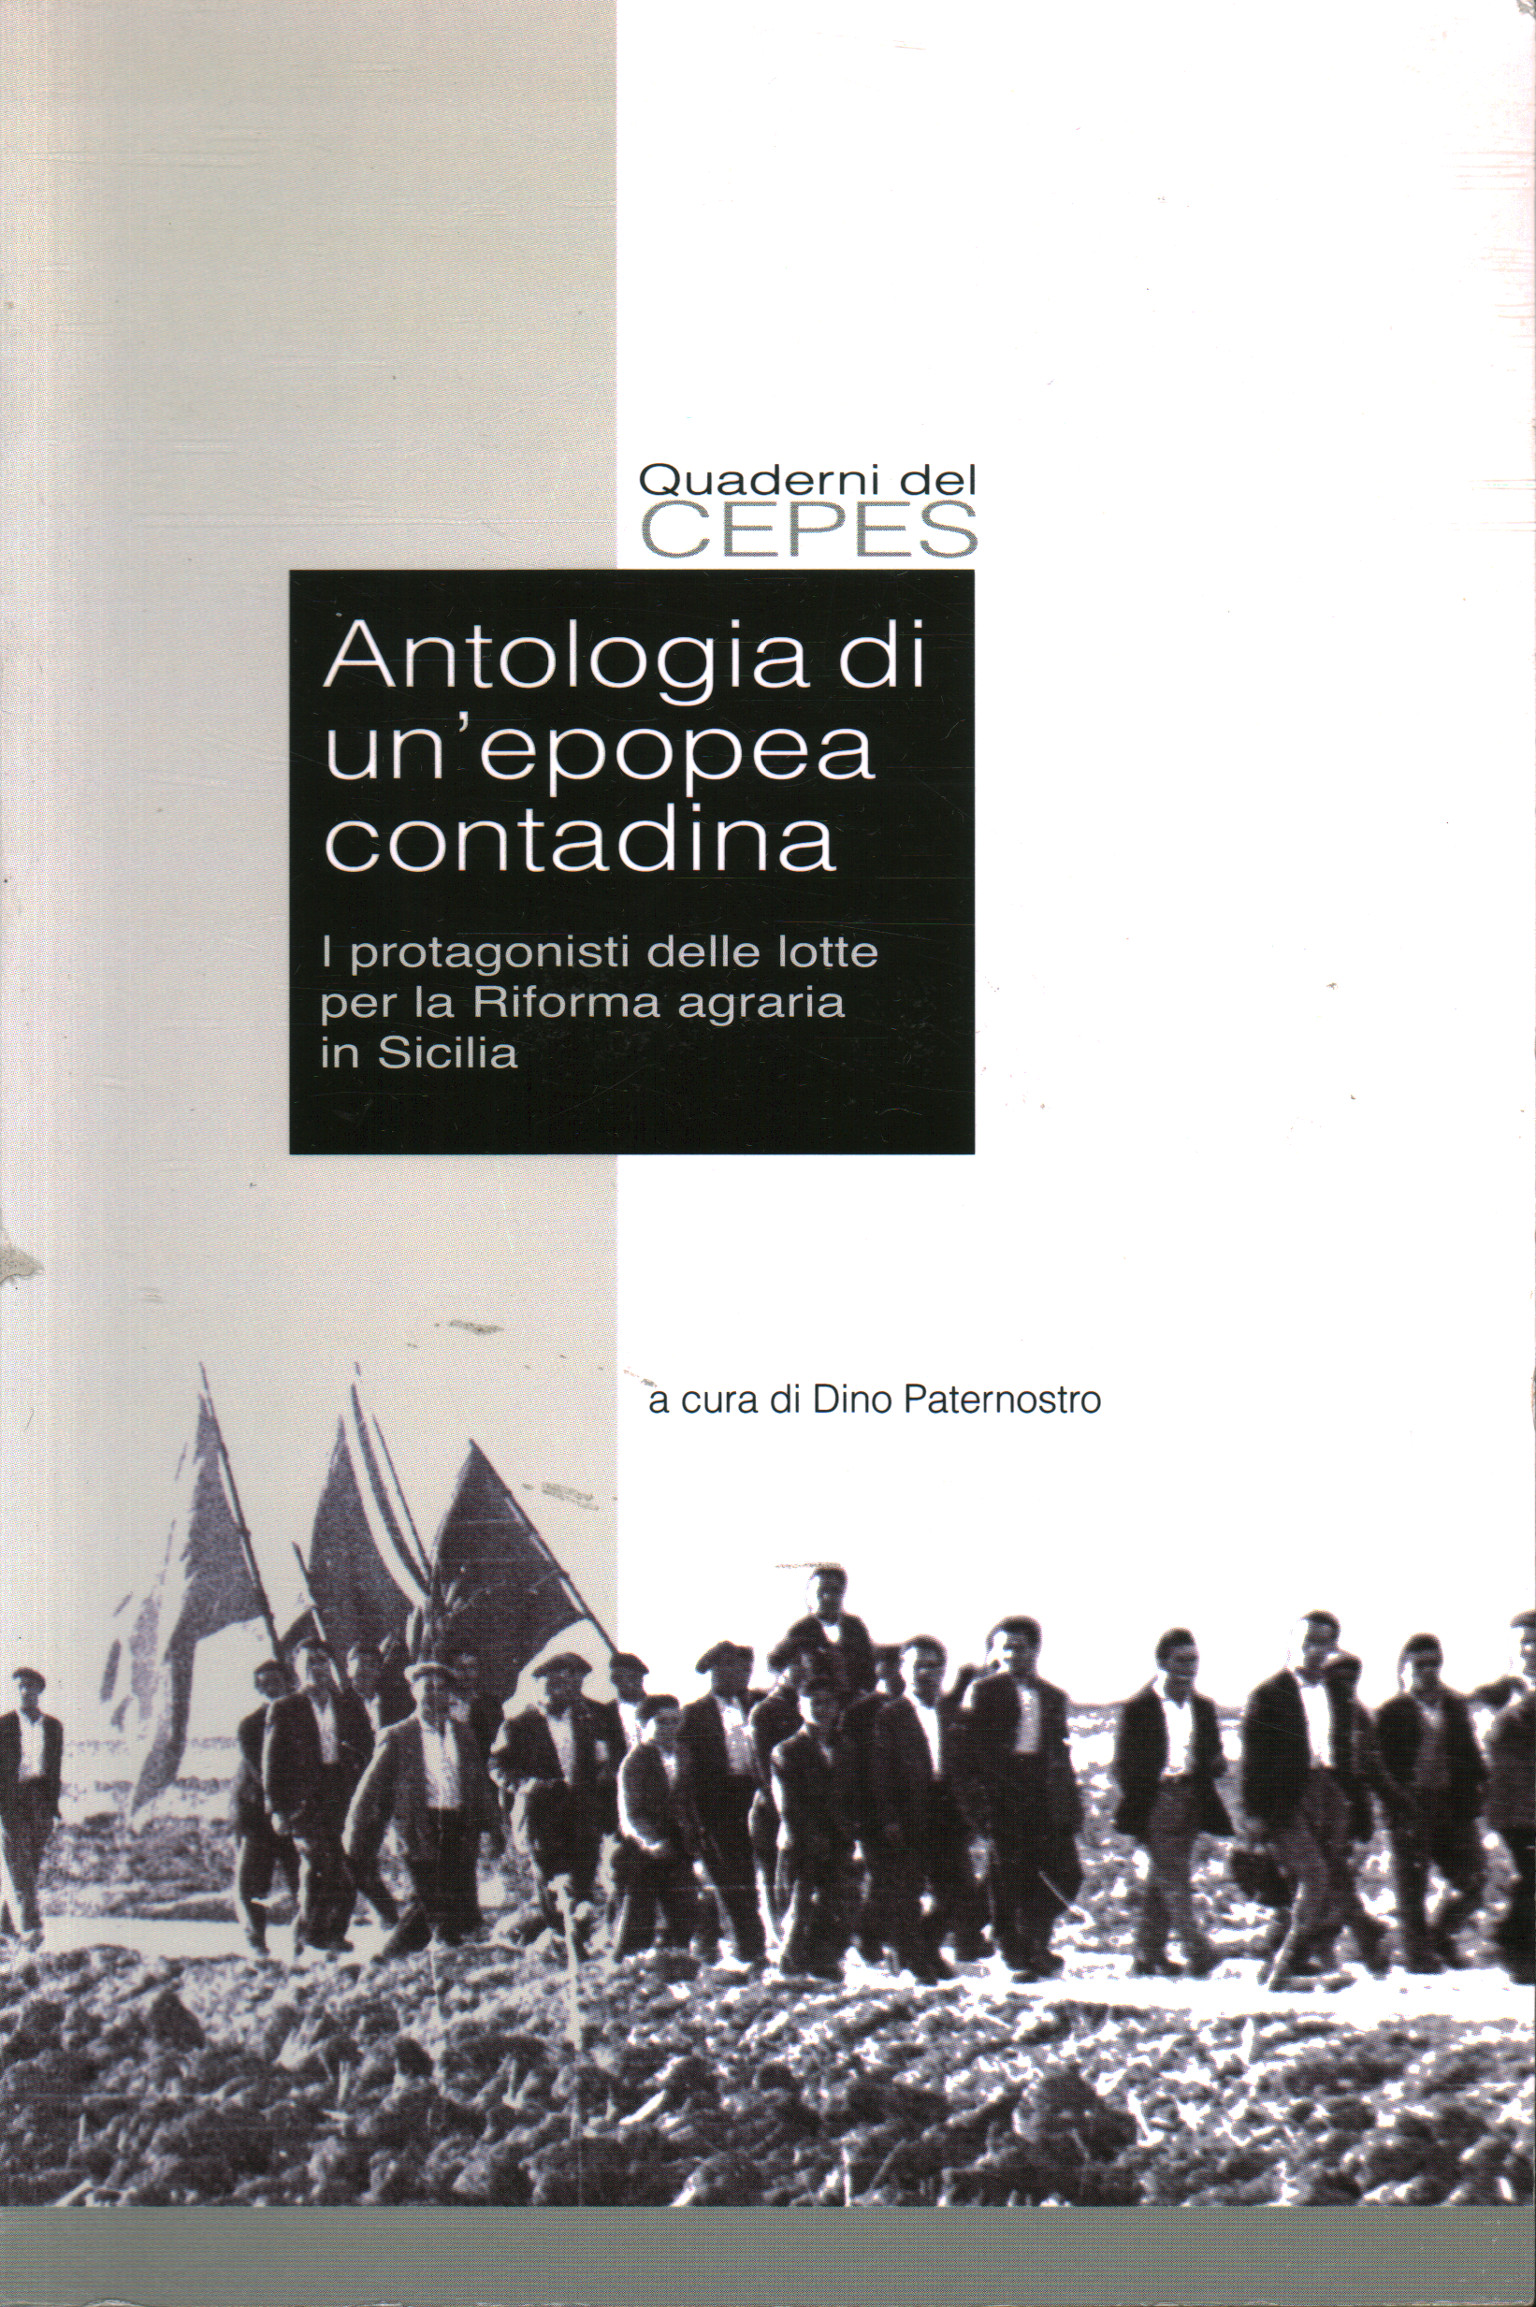 Anthology, an epic of peasant, Dino Paternostro